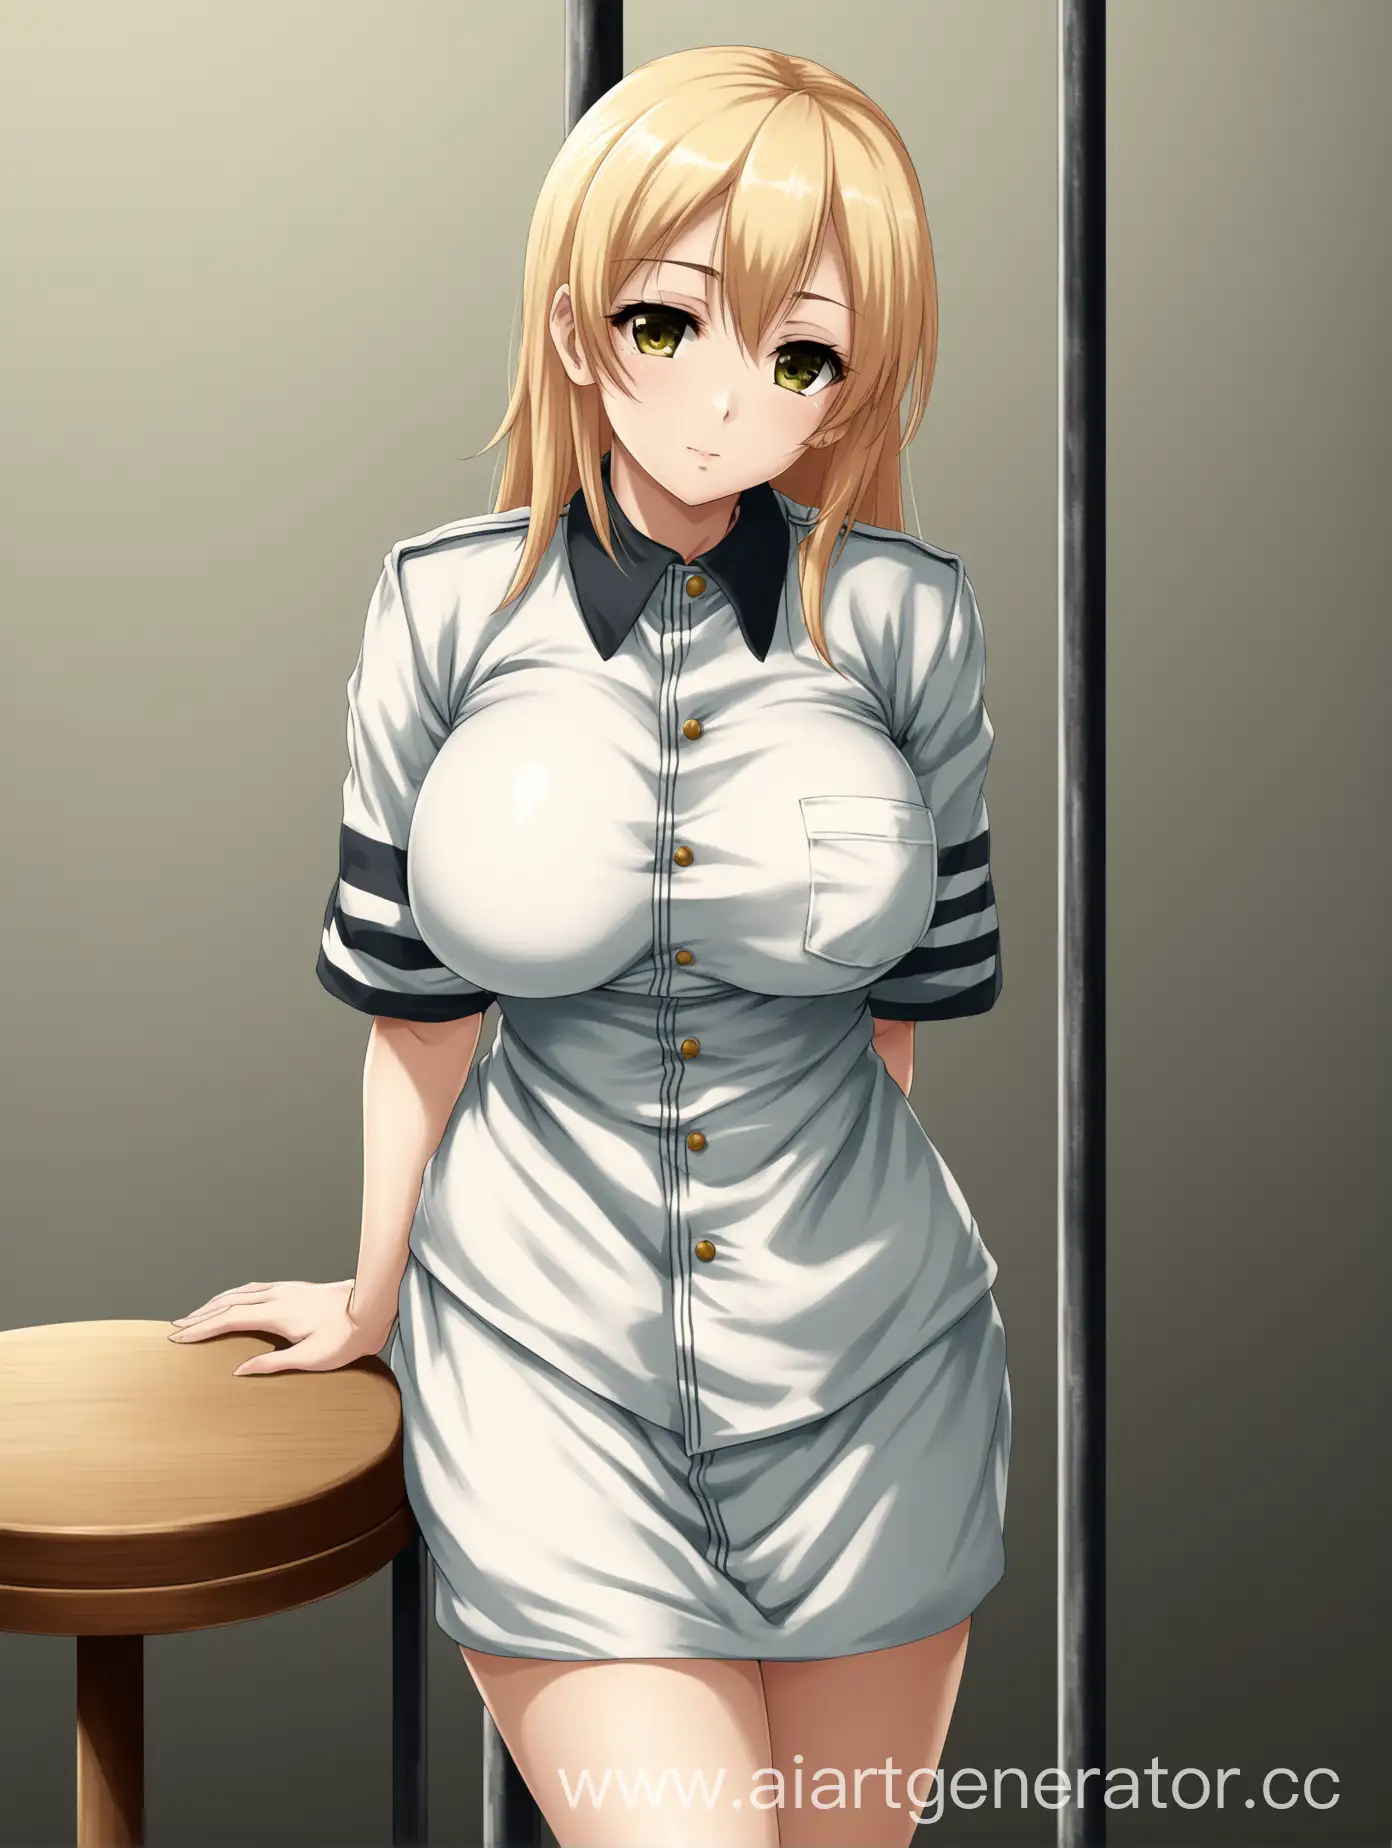 Young-Woman-with-Light-Hair-Leaning-on-a-Stool-in-Prison-Uniform